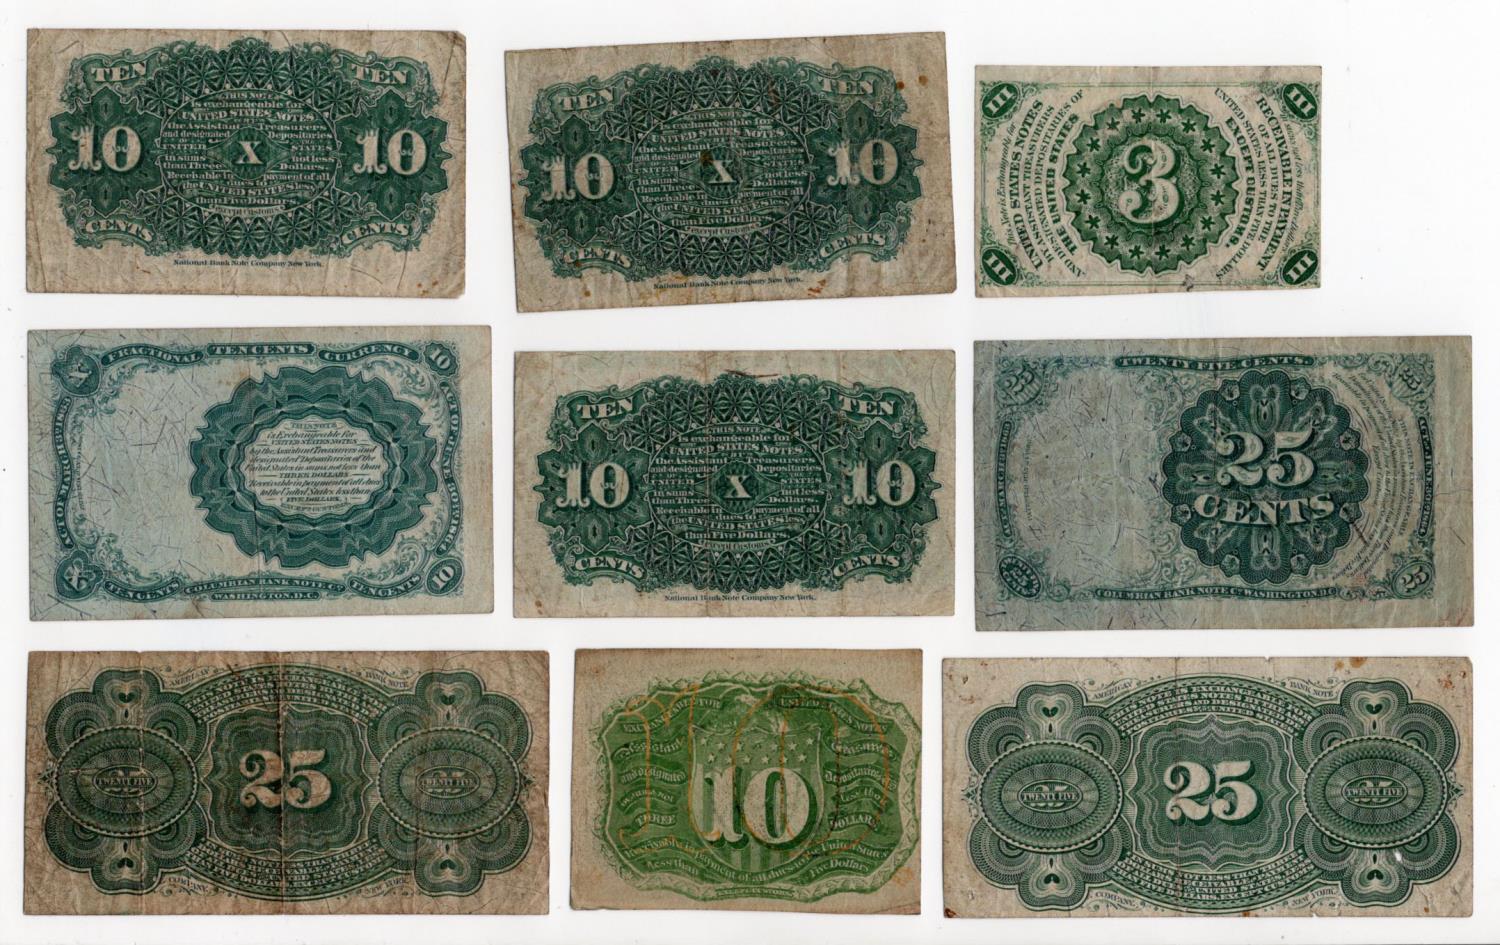 USA Fractional Currency (9), 3 Cents, 10 Cents (4) and 25 Cents (2) dated 3rd March 1863, 10 Cents - Image 2 of 2